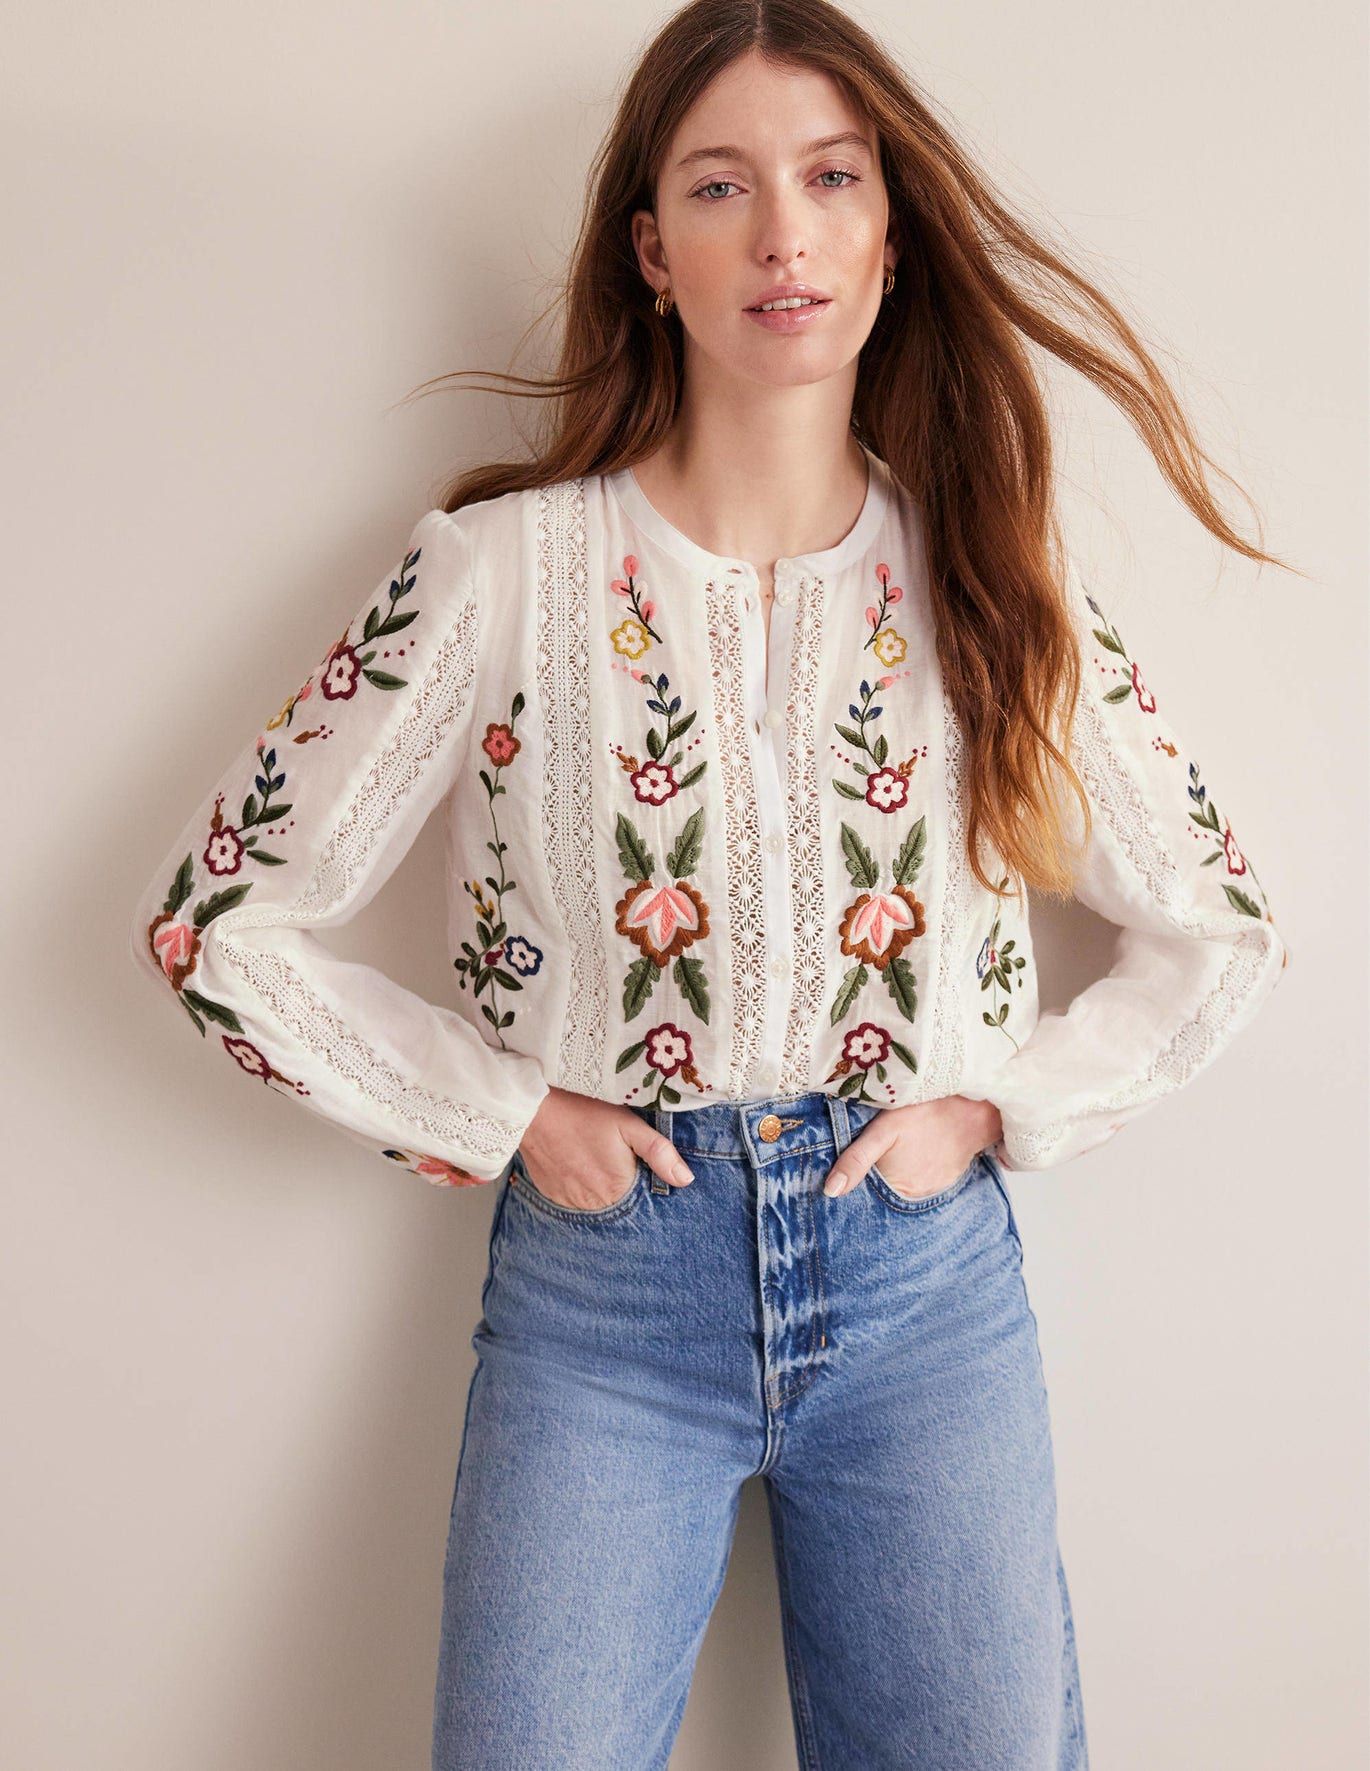 Embroidered blouses 2023: 9 stylish tops to buy now